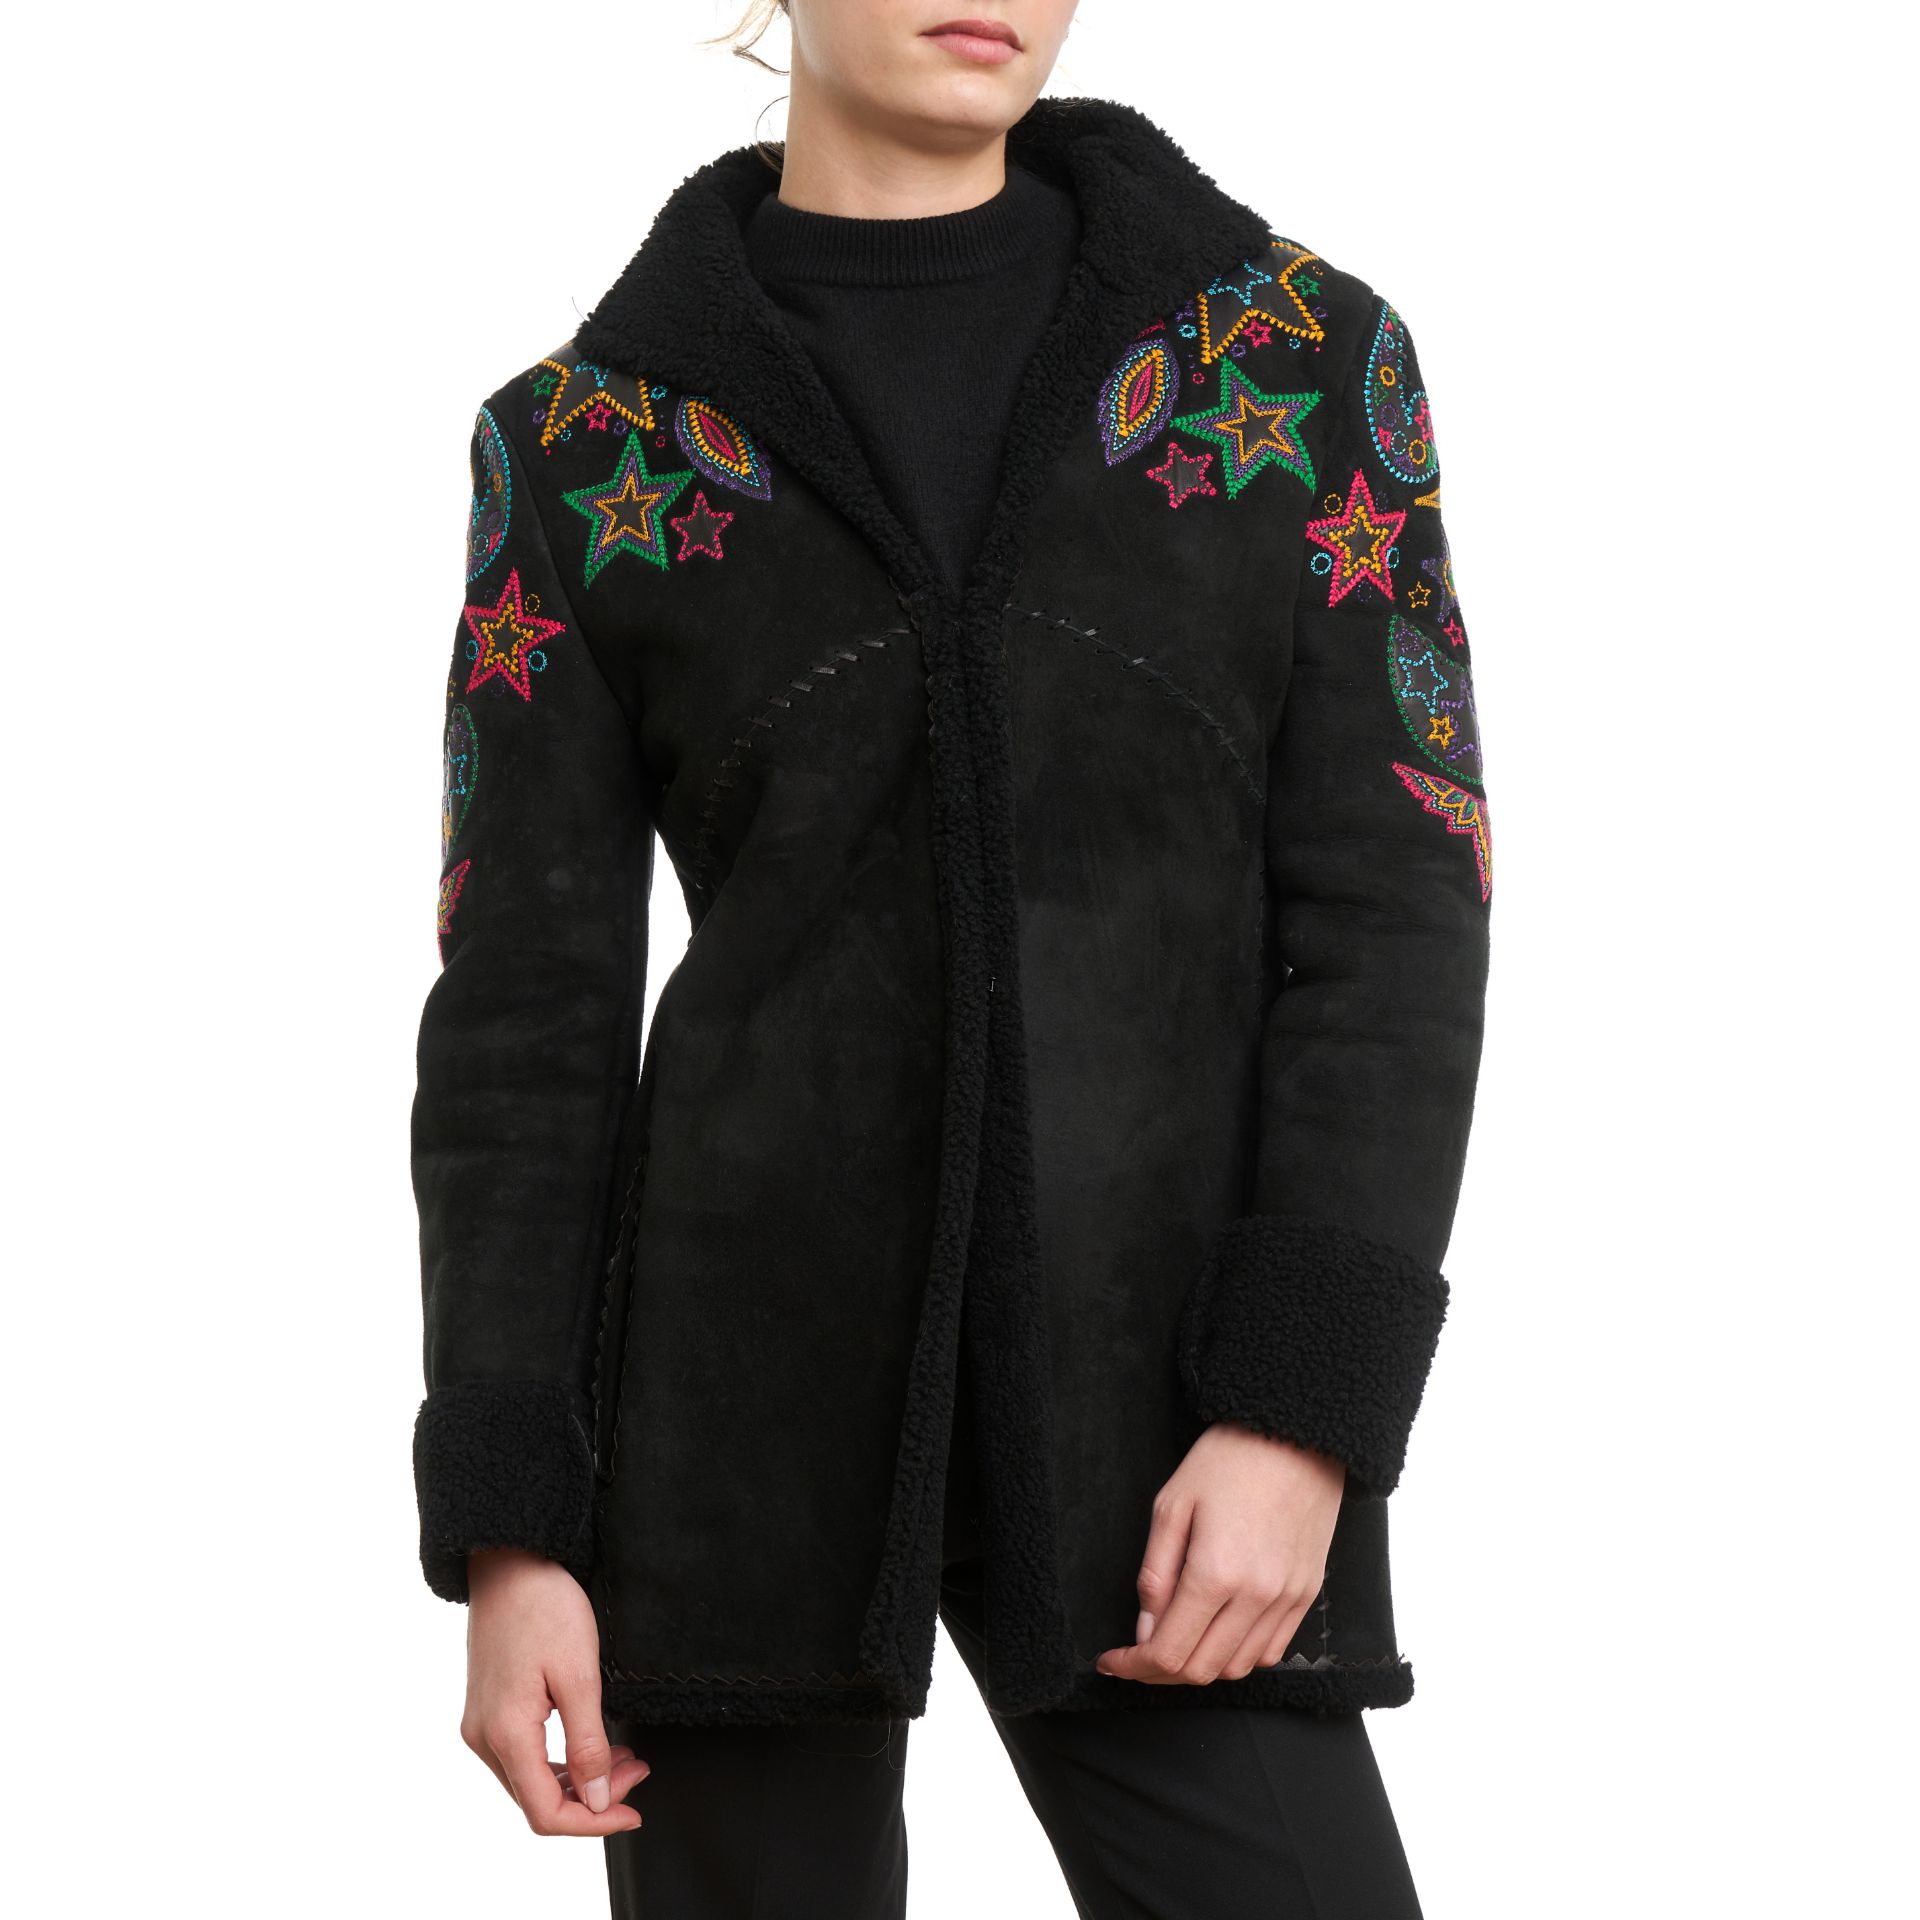 GIANNI VERSACE EMBROIDERED SHEARLING AFGHAN COAT Condition grade B-. 80cm chest, 80cm length. B...